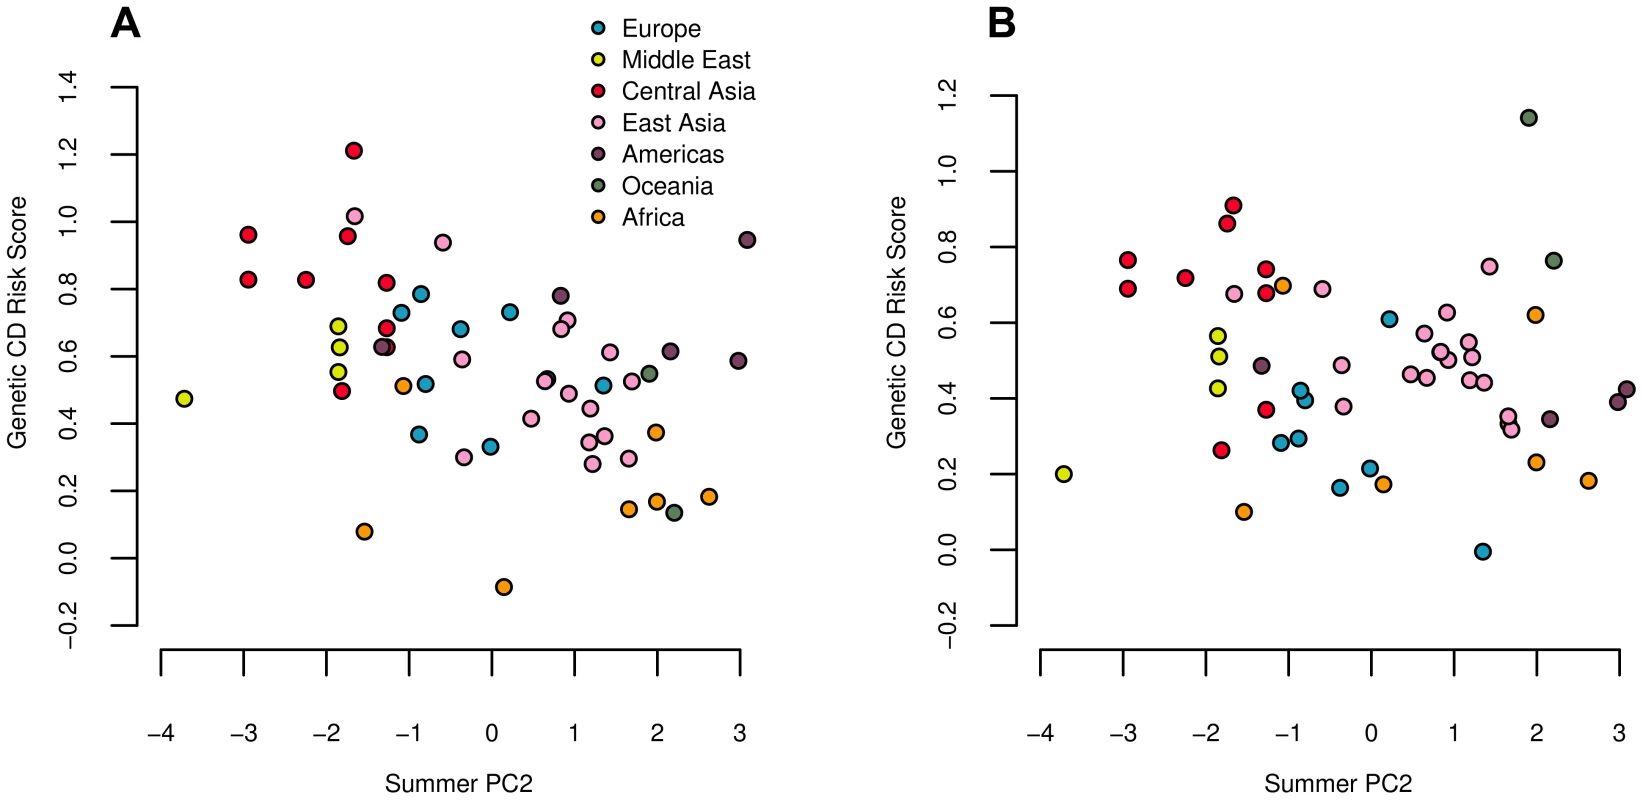 Estimated genetic risk score for Crohn's disease (A) and ulcerative colitis (B) risk plotted against summer PC2.